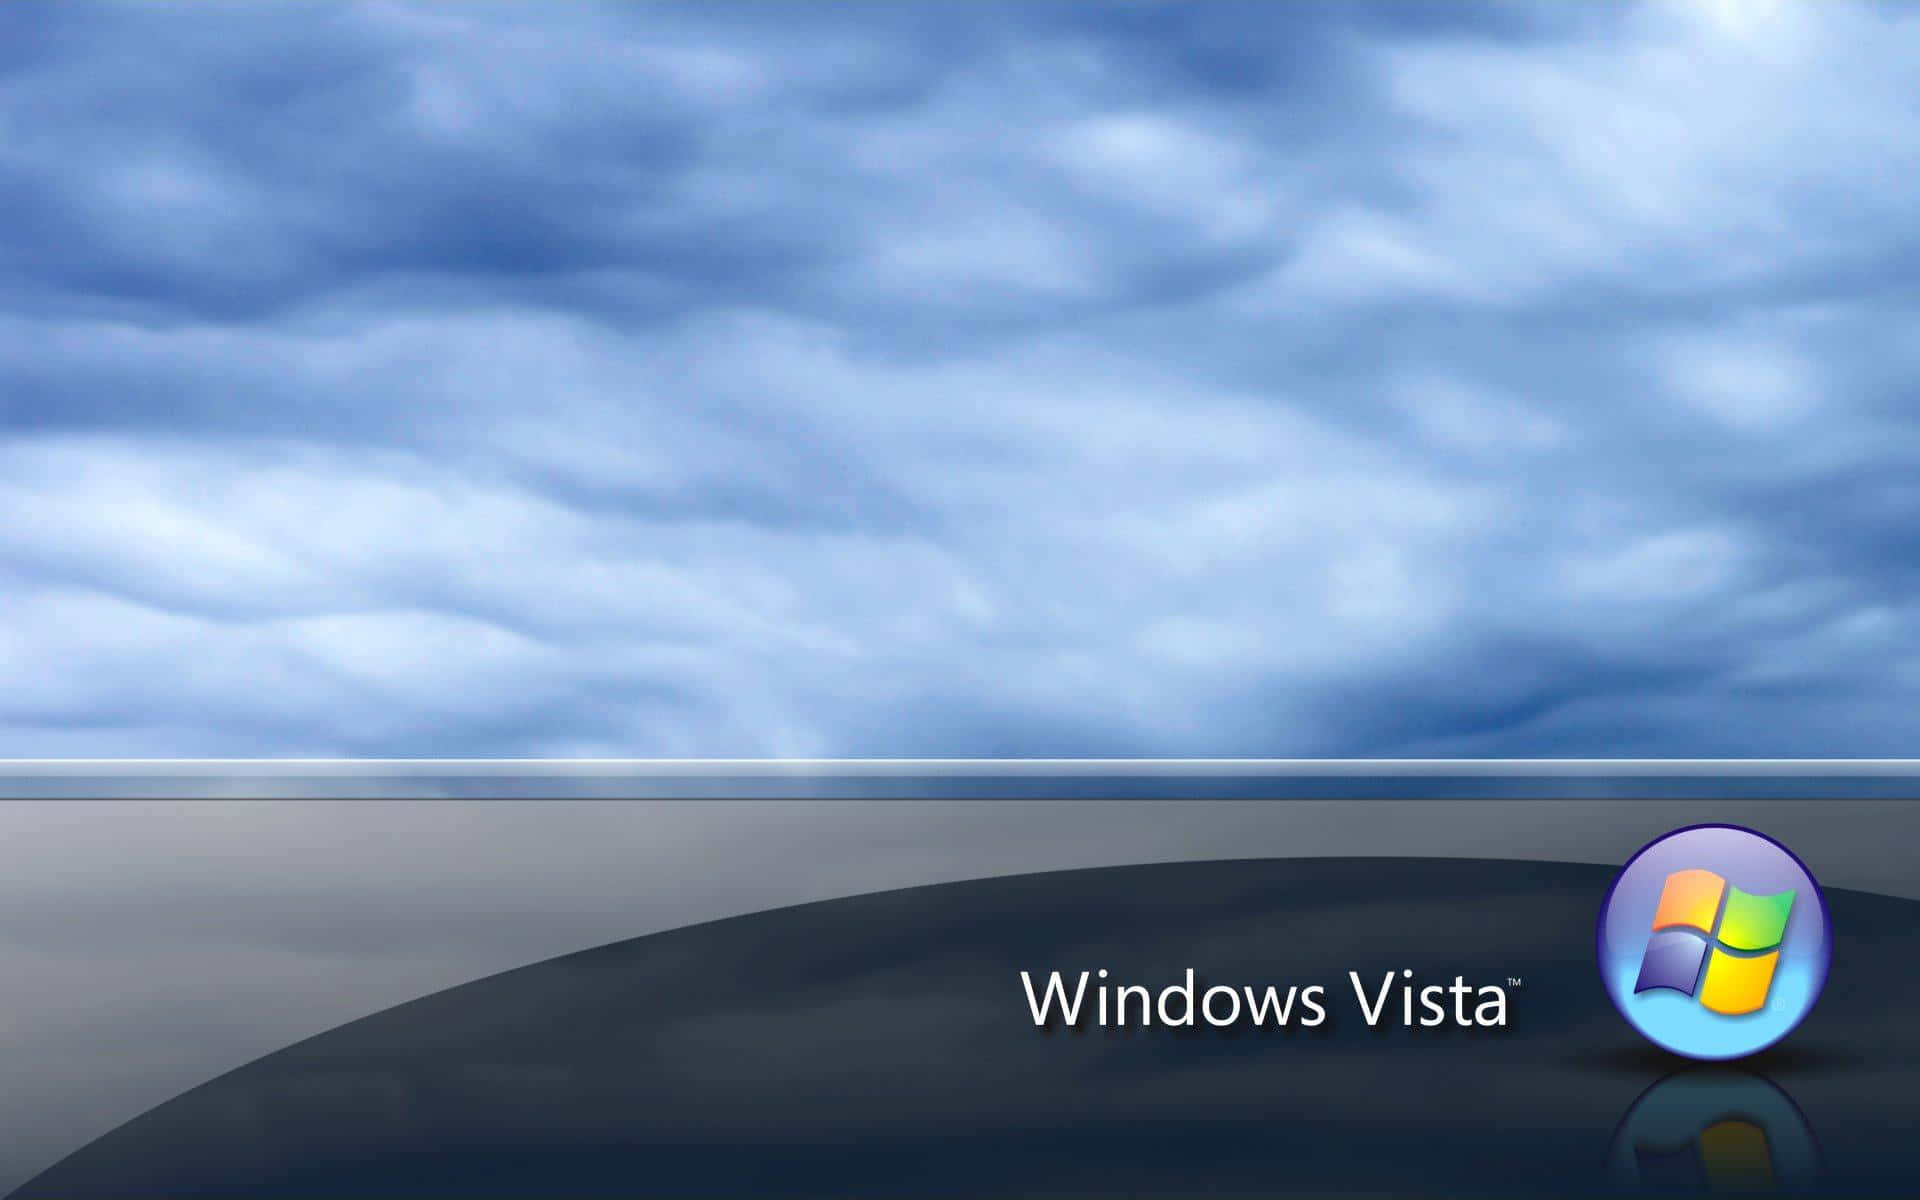 Transform your experience with Windows Vista